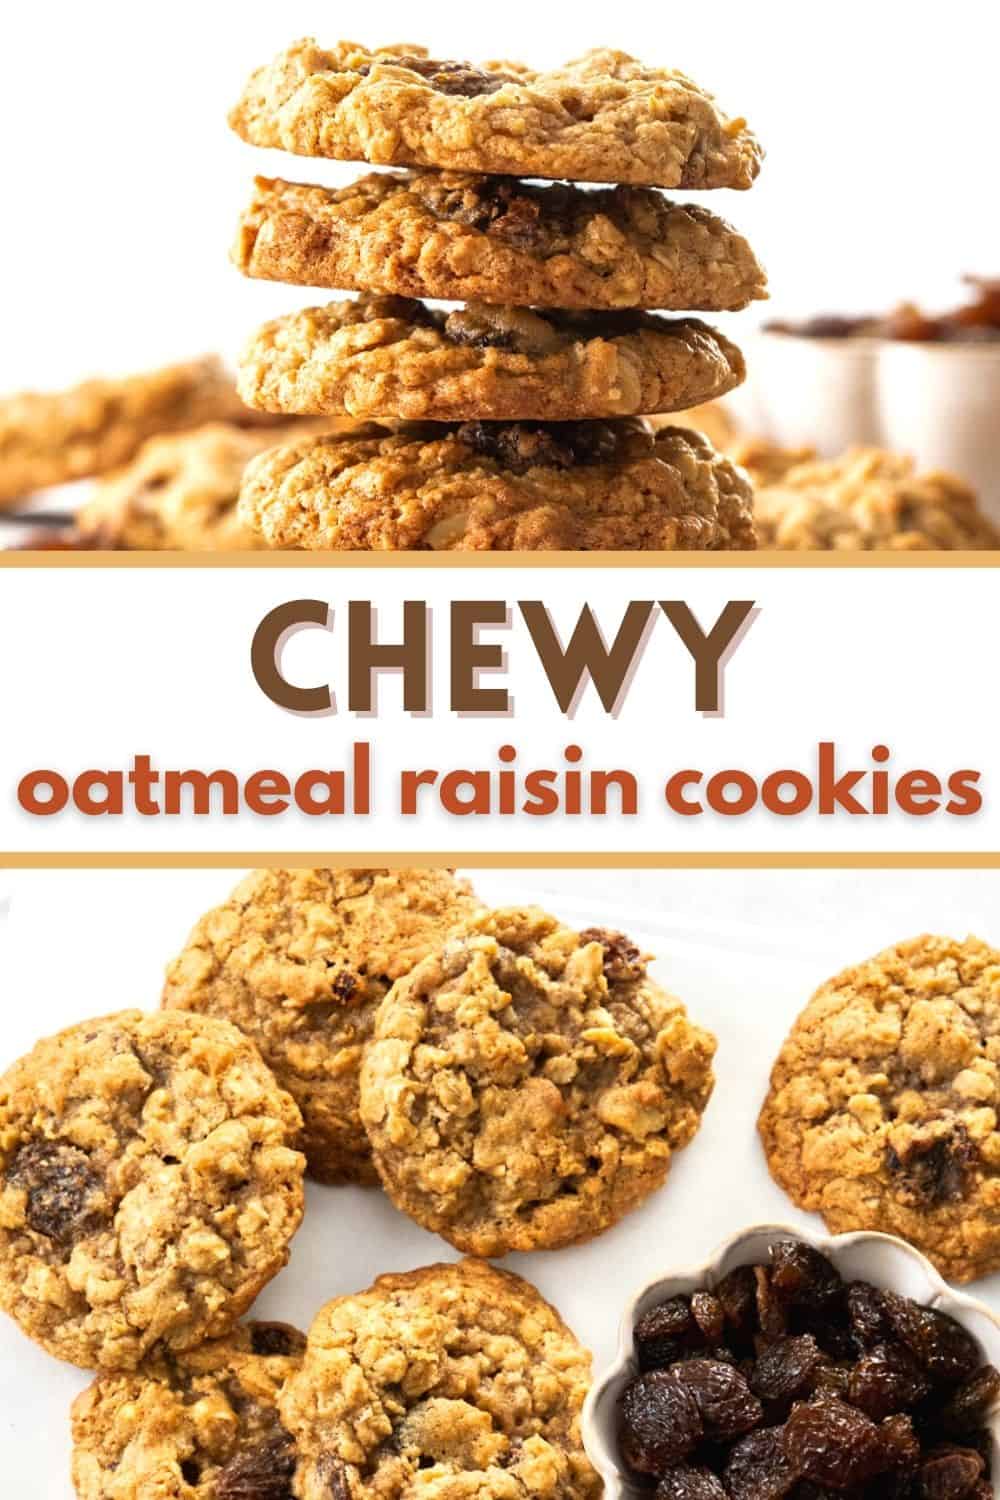 This oatmeal raisin cookie recipe is a classic and the only one you need. Hints of cinnamon and nutmeg put these favorite cookies above the rest!